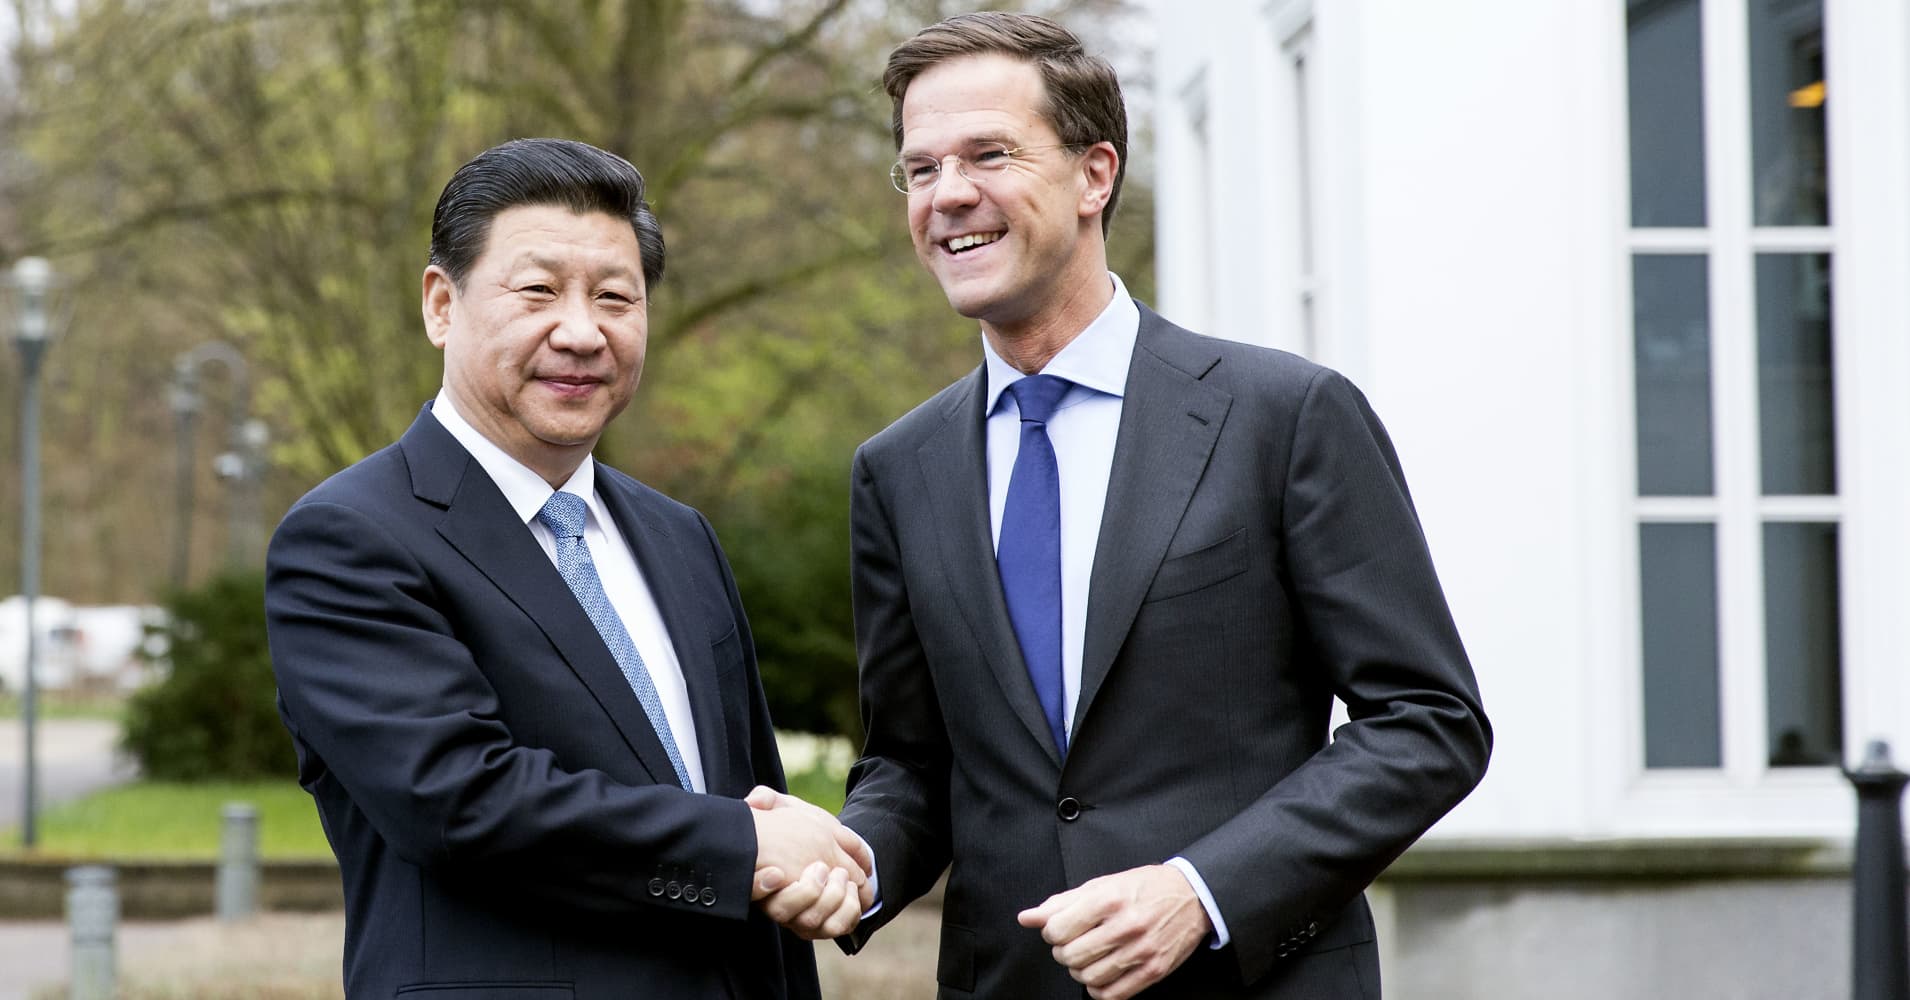 xi tells dutch prime minister: no force can stop china’s tech advance